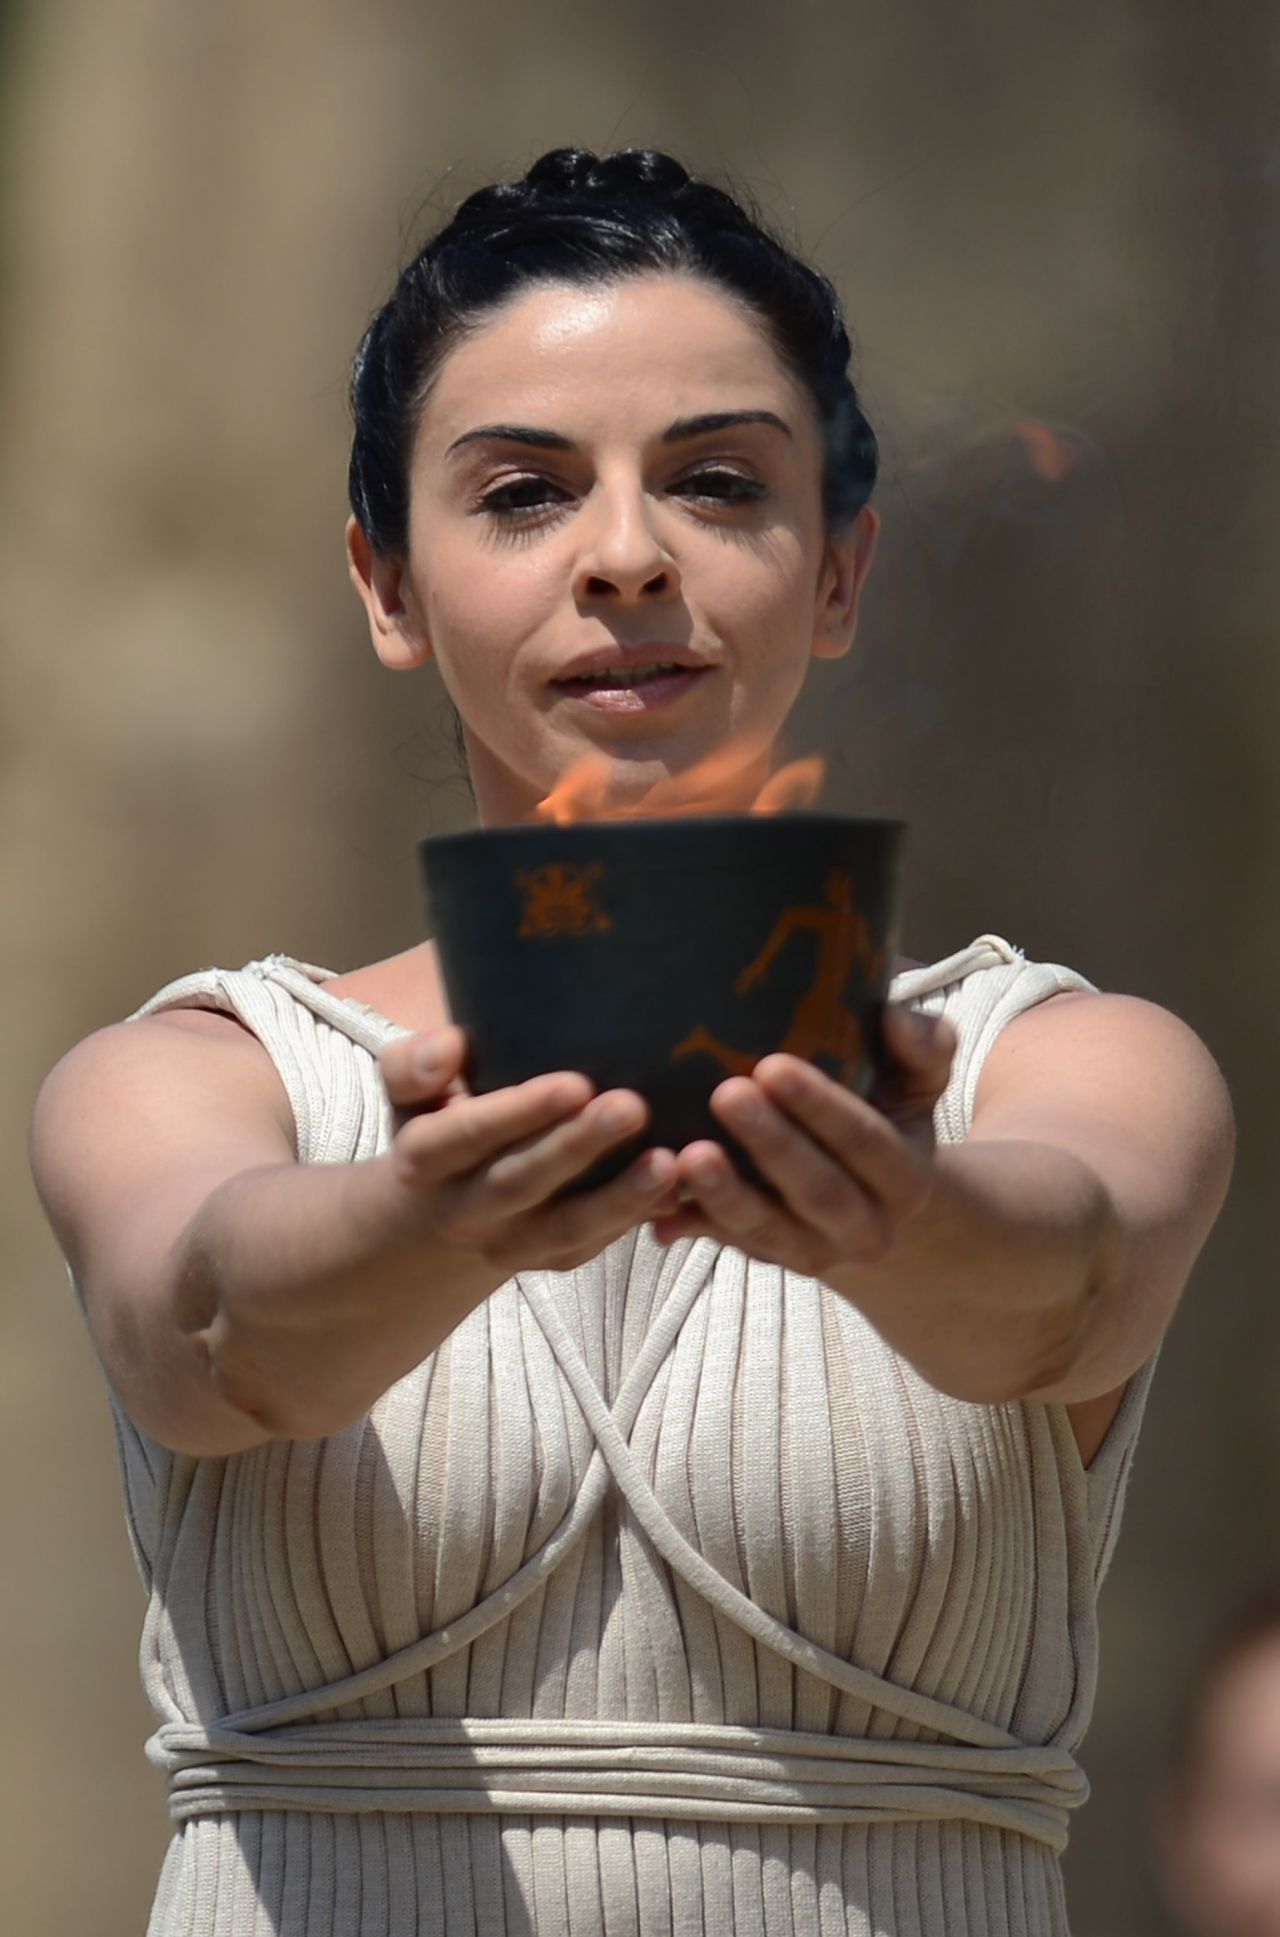 The priestess, played by Greek actress Ino Menegaki, lifts the "Archaic Pot" from which the flame is lit. 